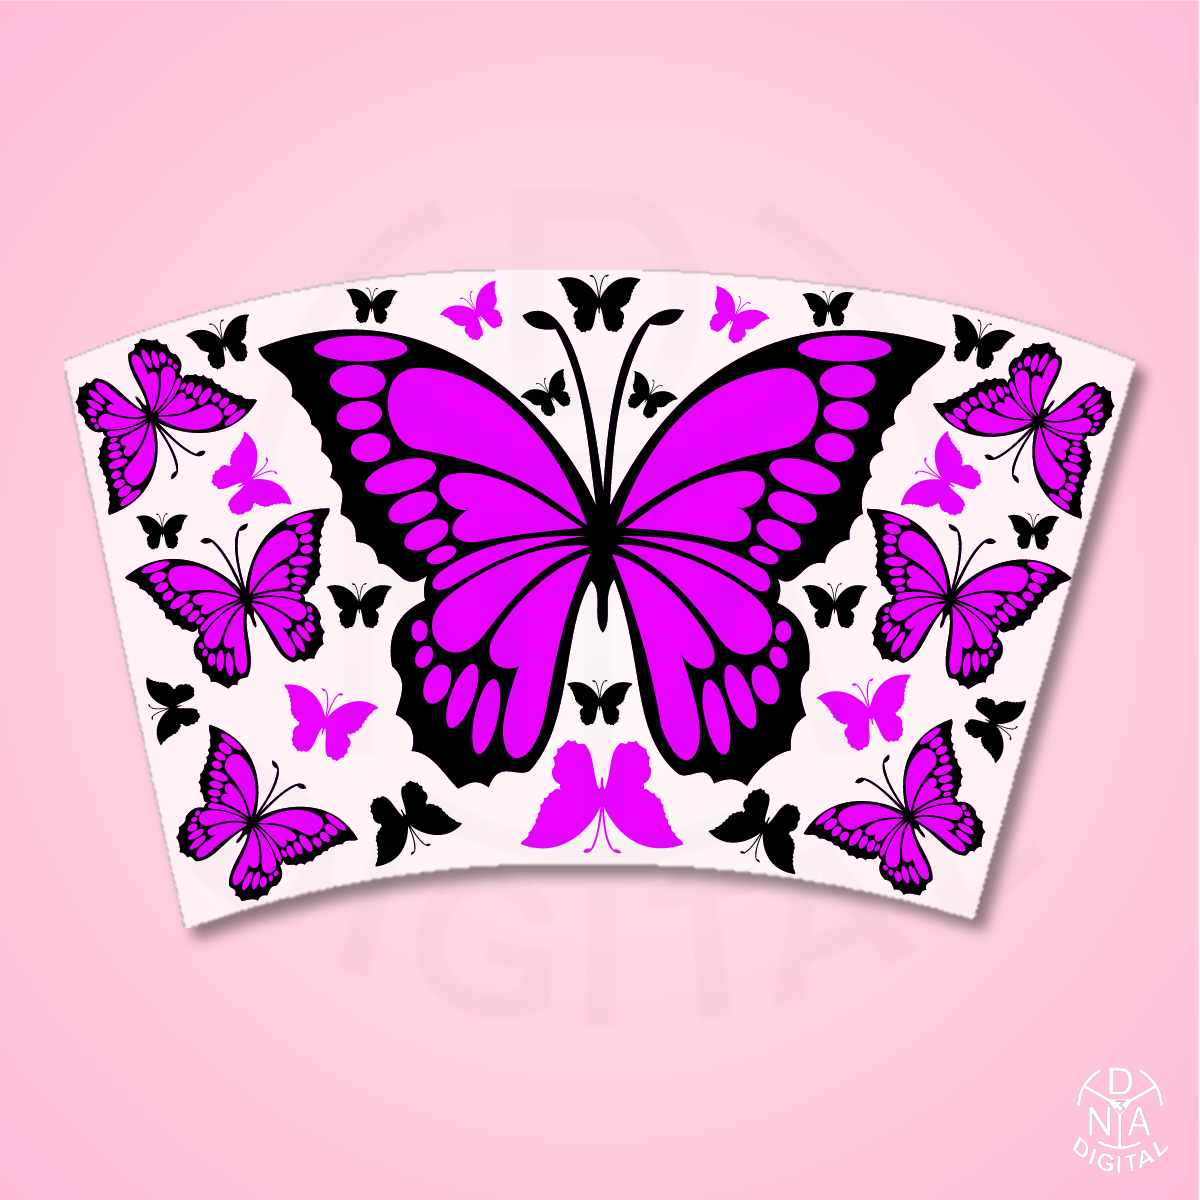 Butterfly Fields Starbucks Reusable Hot Cup – Twisted Magenta